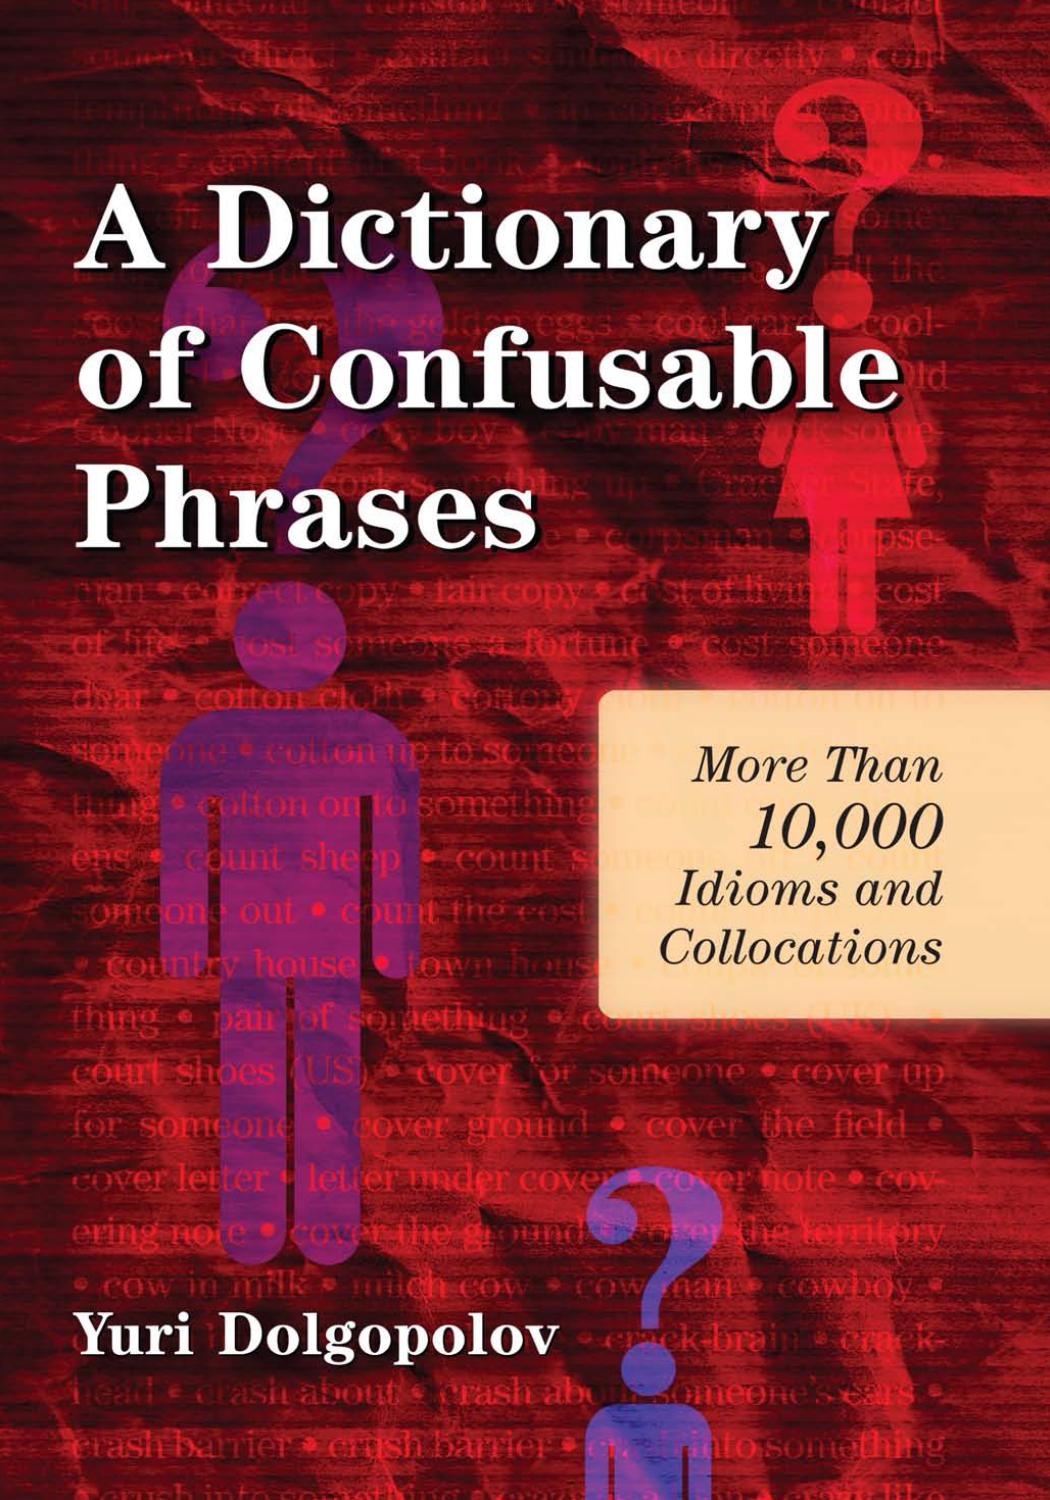 A Dictionary of Confusable Phrases: More Than 10,000 Idioms and Collocations